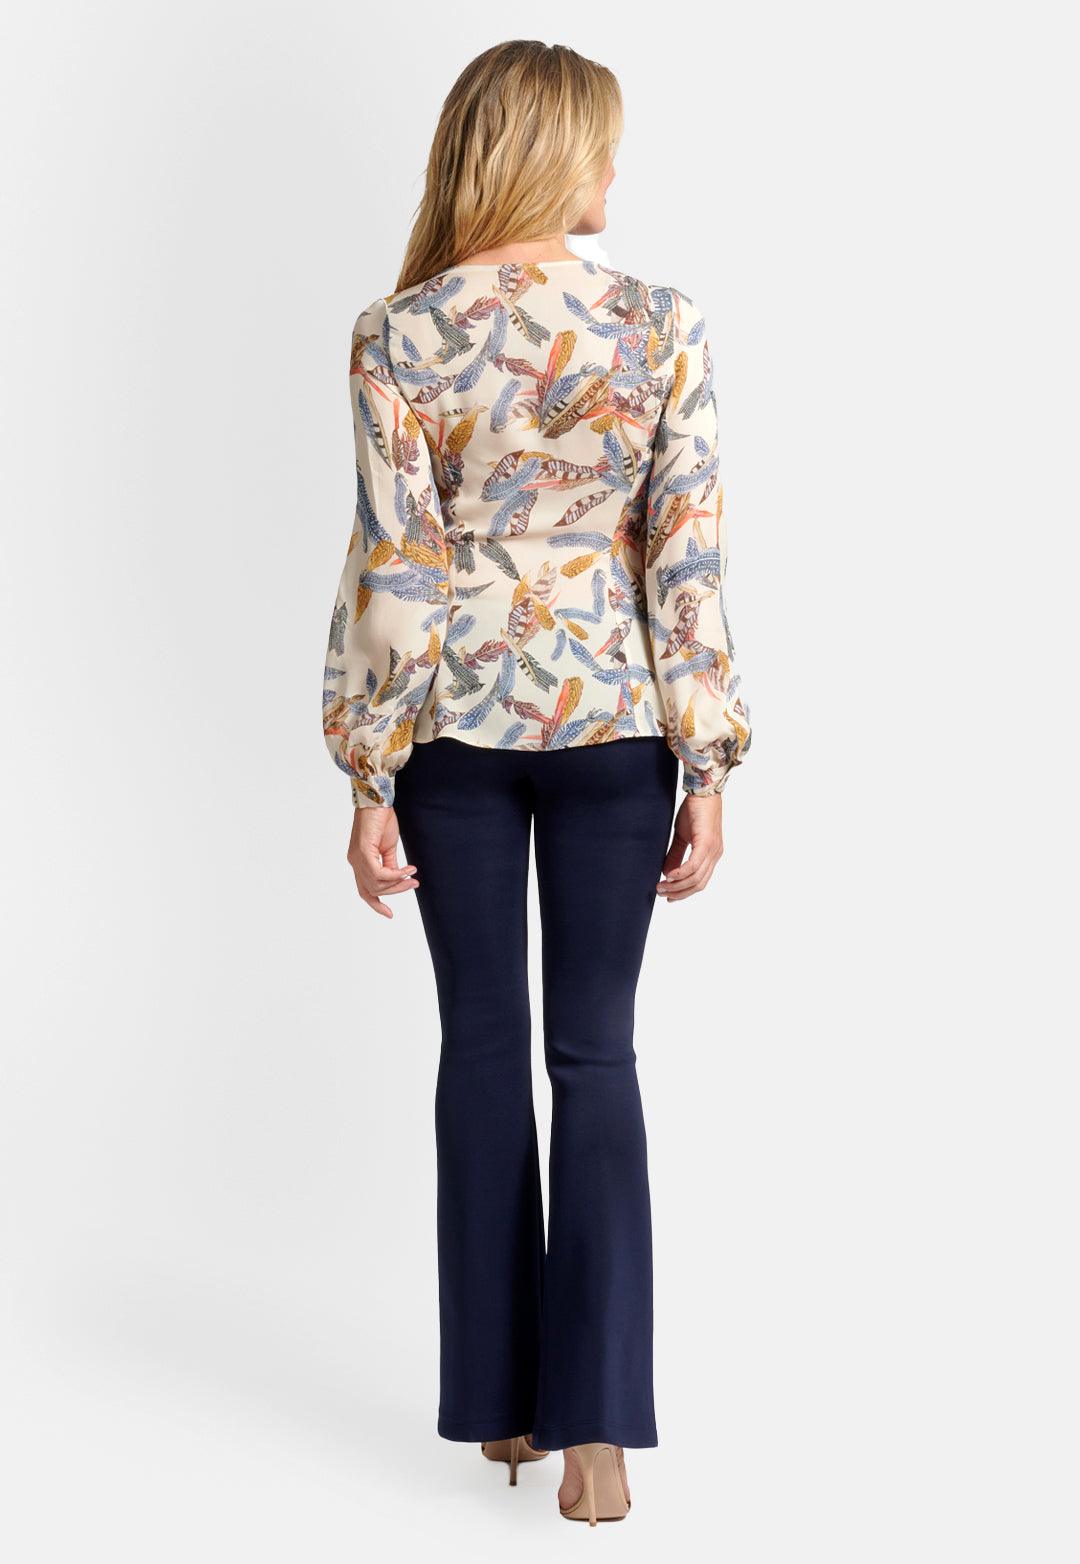 Model wearing cream cowl neck silk blouse top printed with feathers with navy stretch knit pants